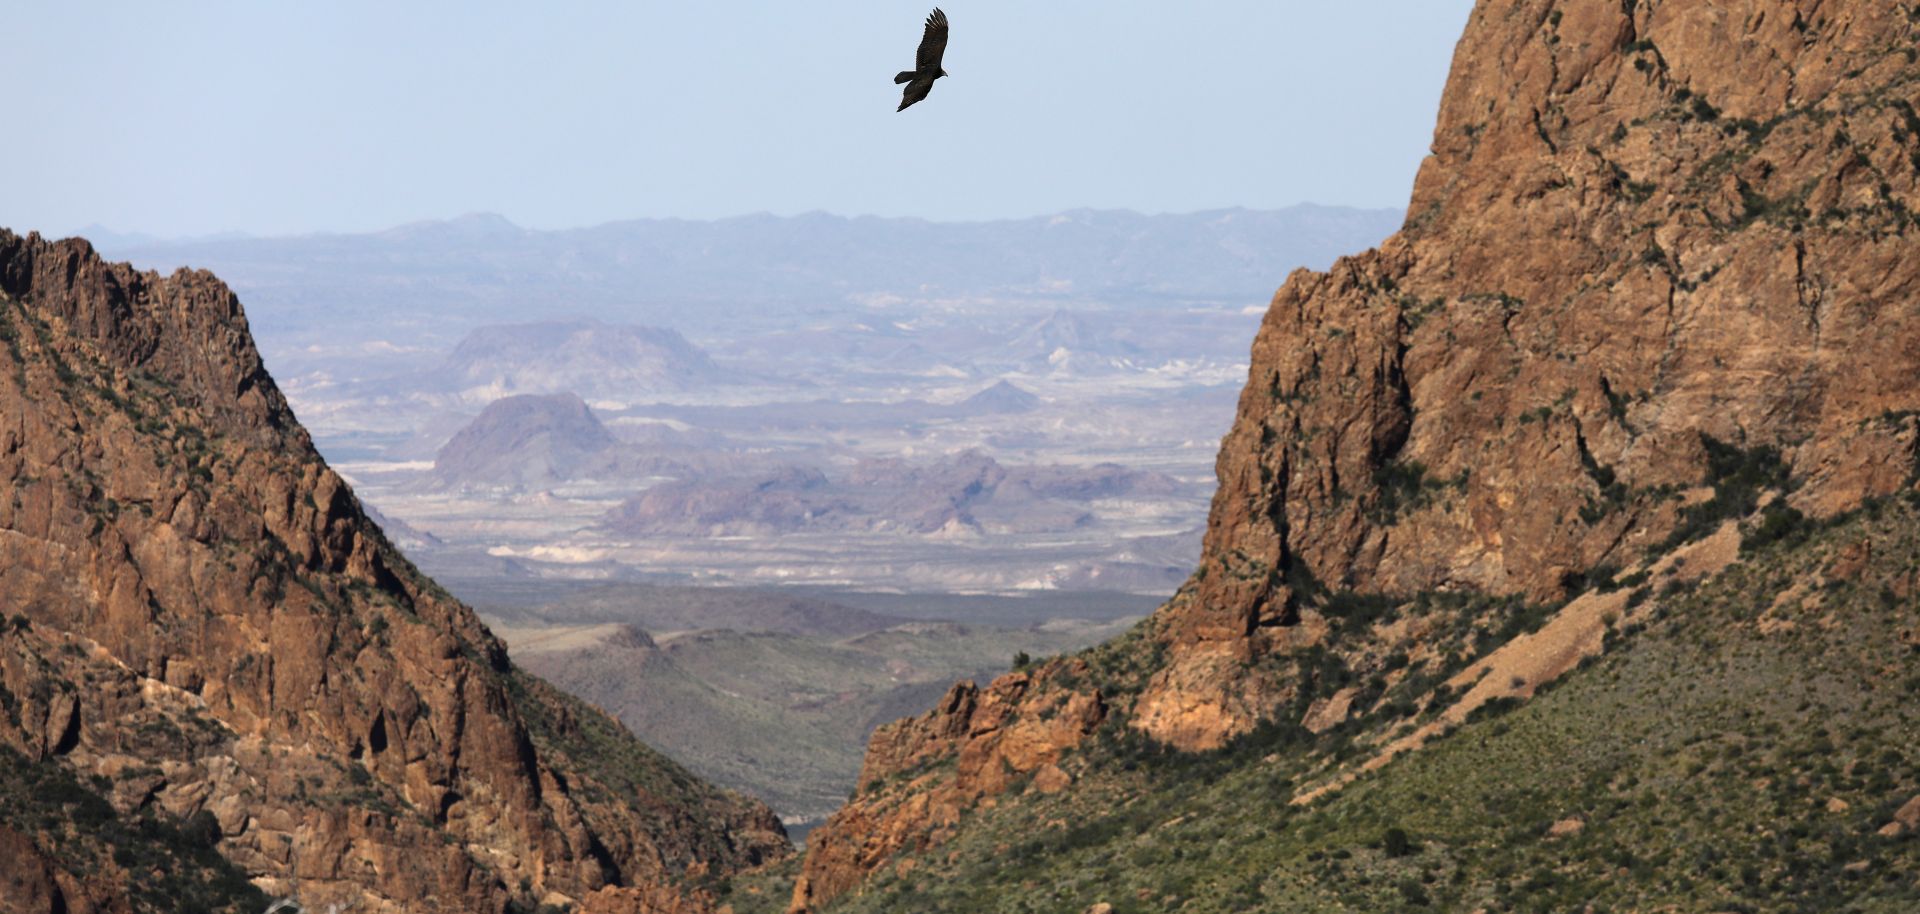 This photo shows the rugged territory in the Chisos Mountains typical of the landscape in the Big Bend region along the U.S.-Mexico border.